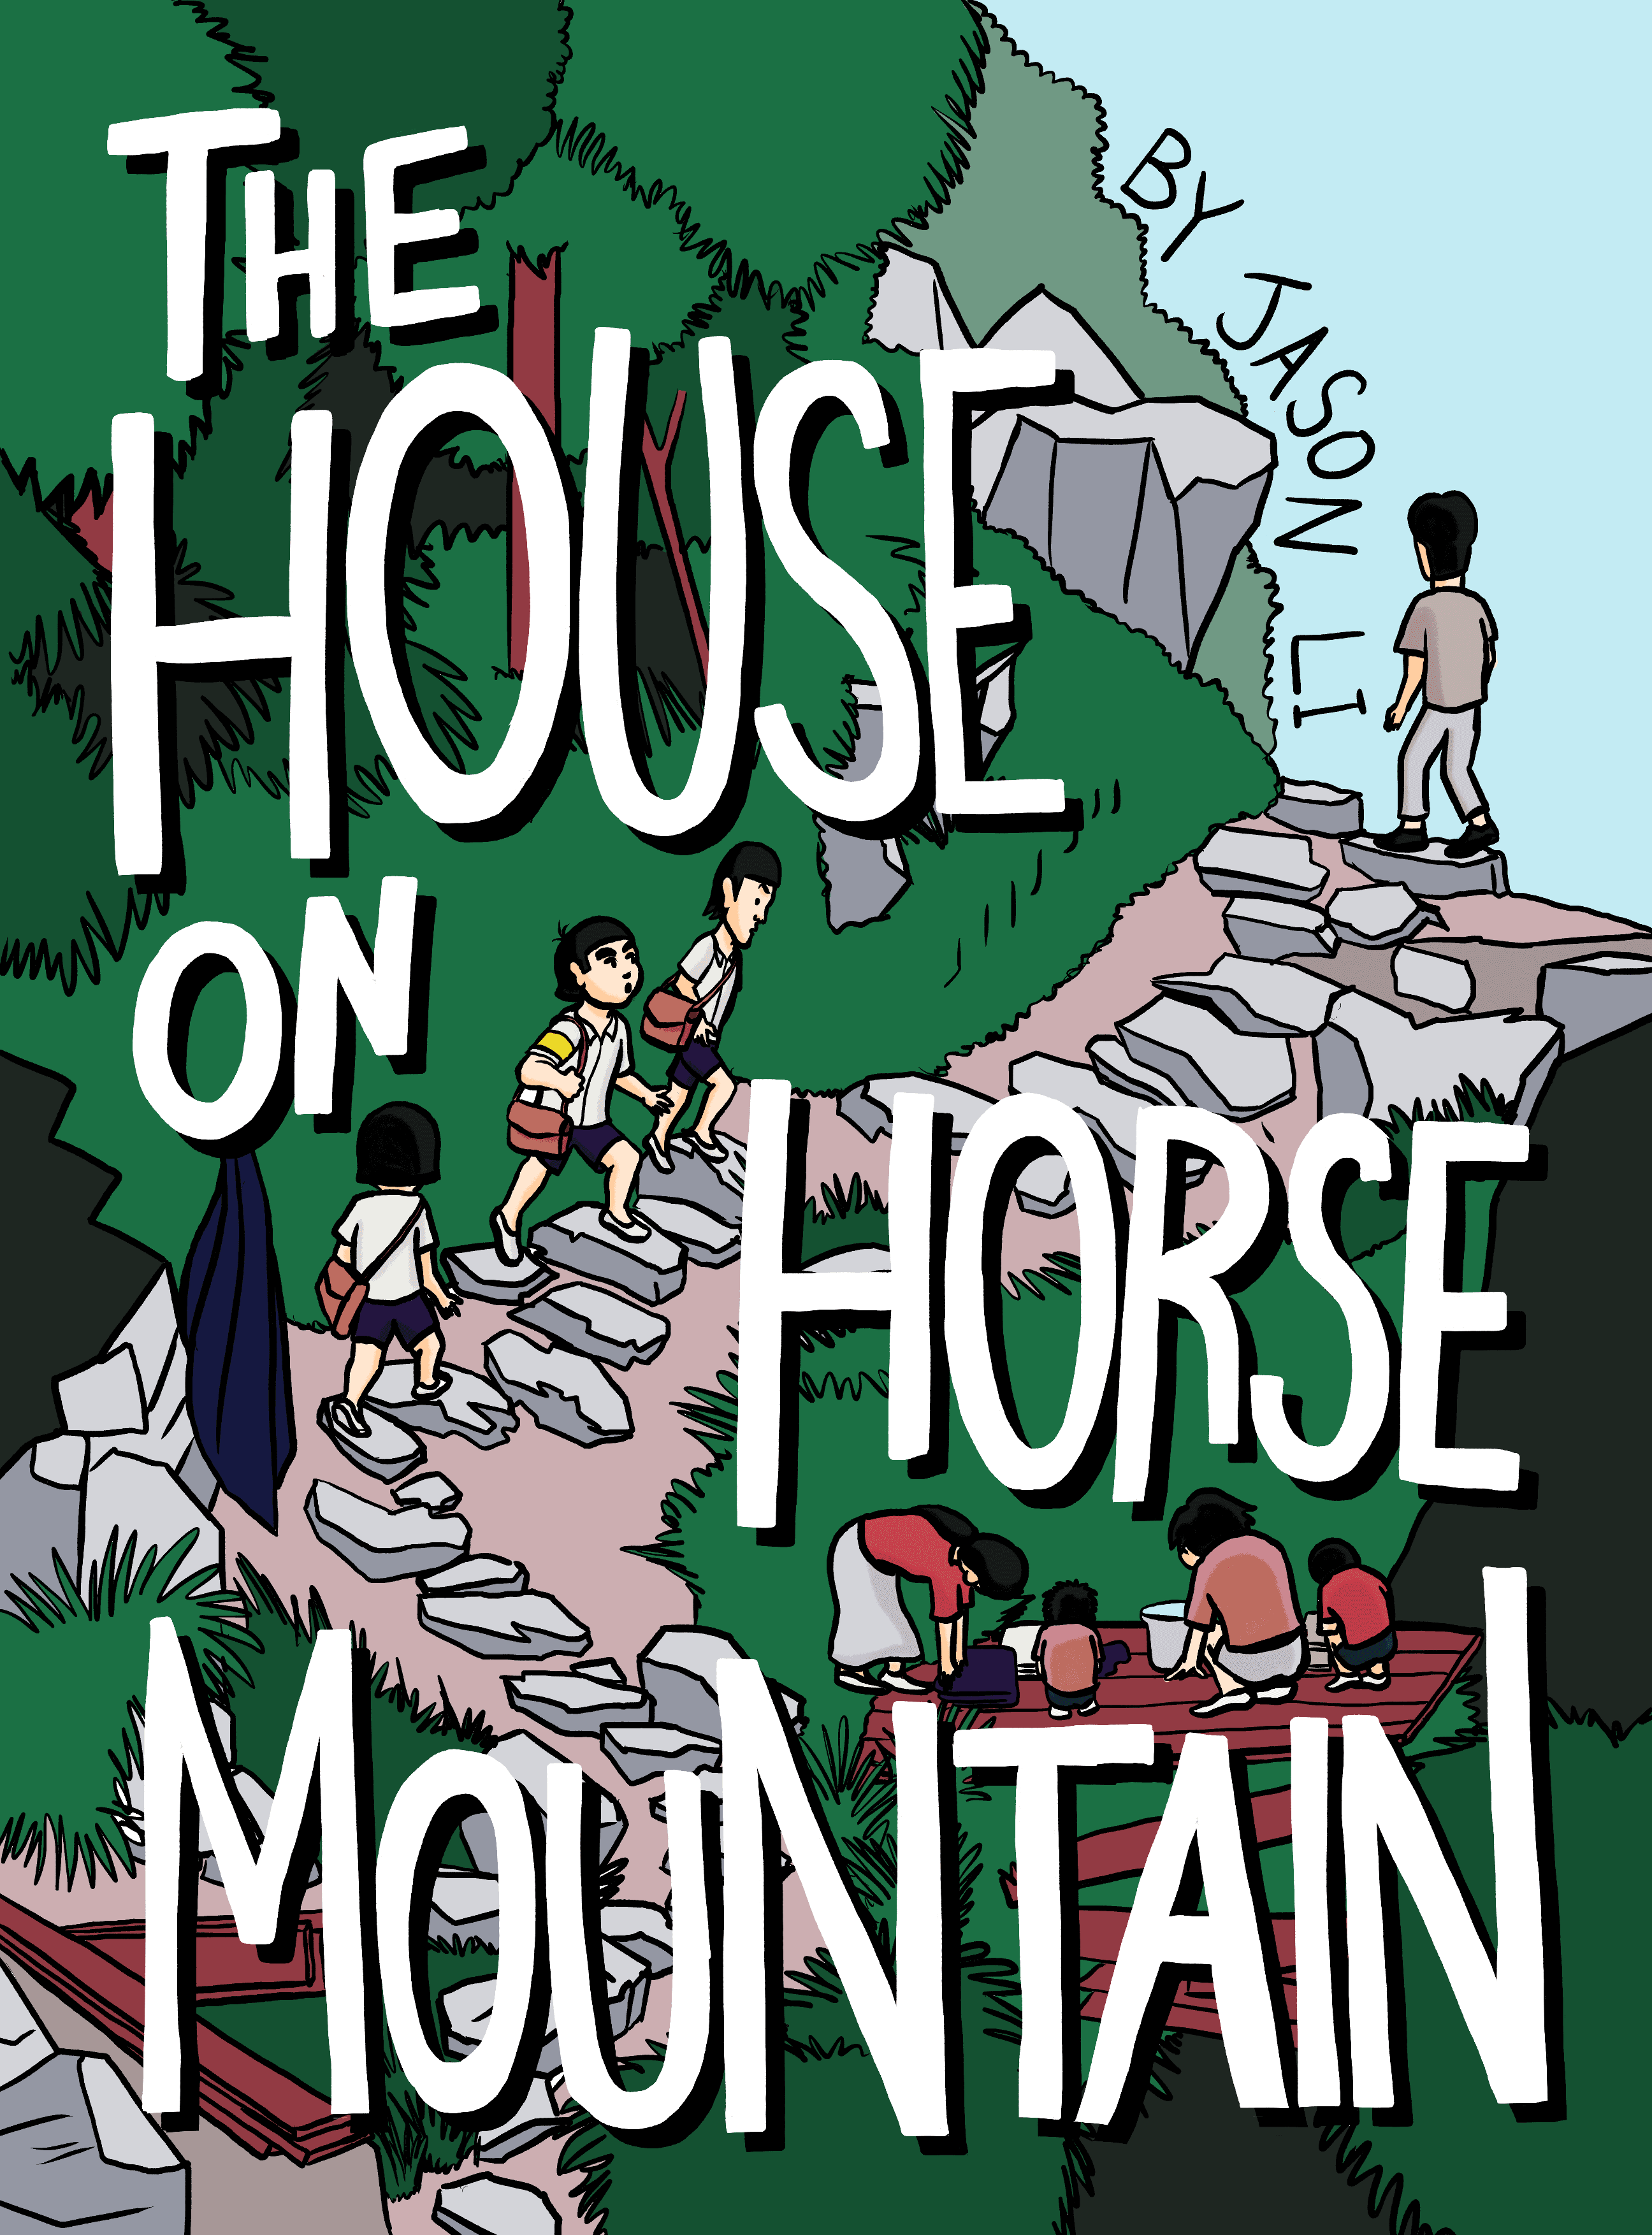 Book cover image of The House on Horse Mountain featuring a small group of students walking up a hill next to lush foilage and trees